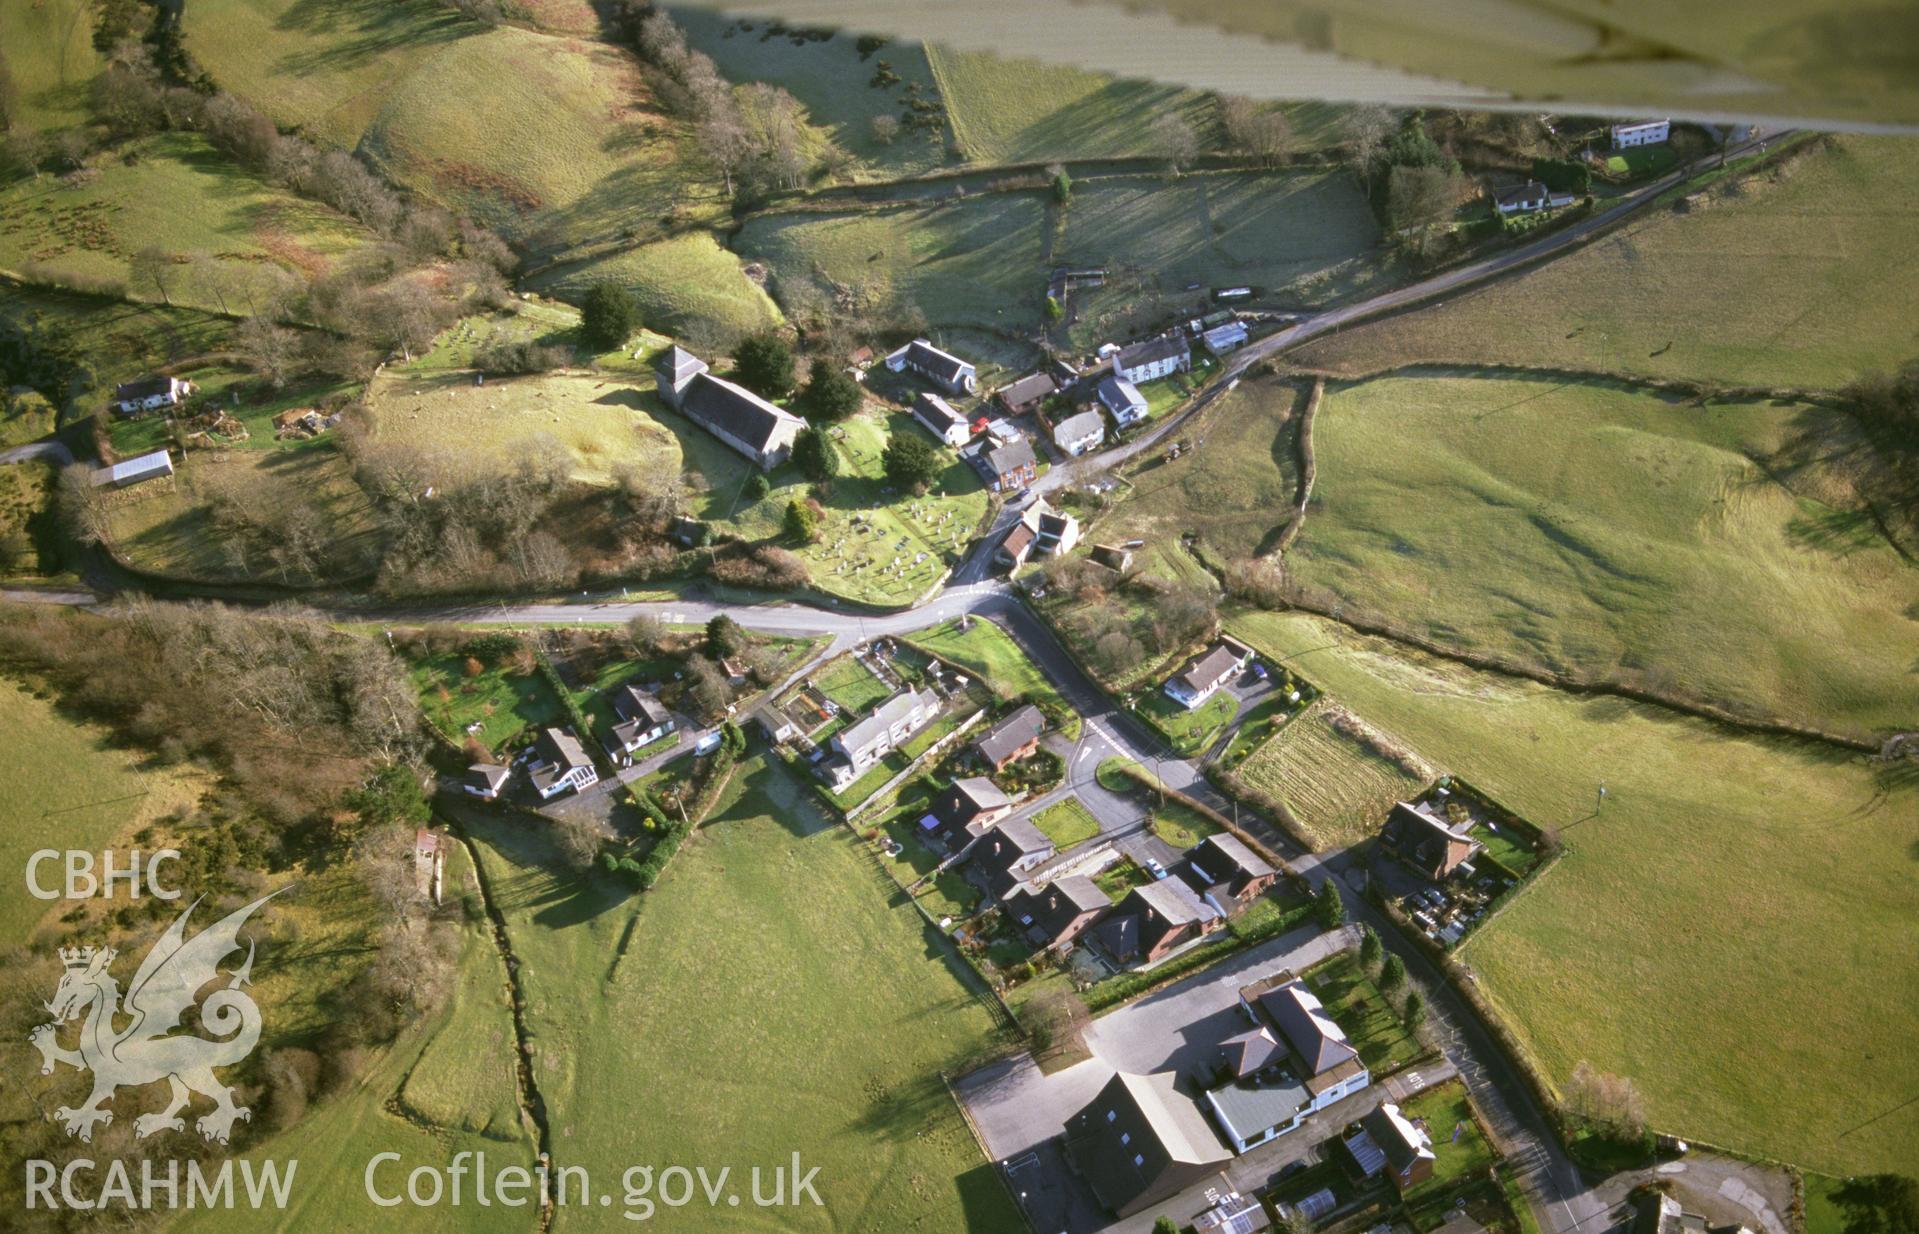 Slide of RCAHMW colour oblique aerial photograph of Llanbister, taken by T.G. Driver, 2001.